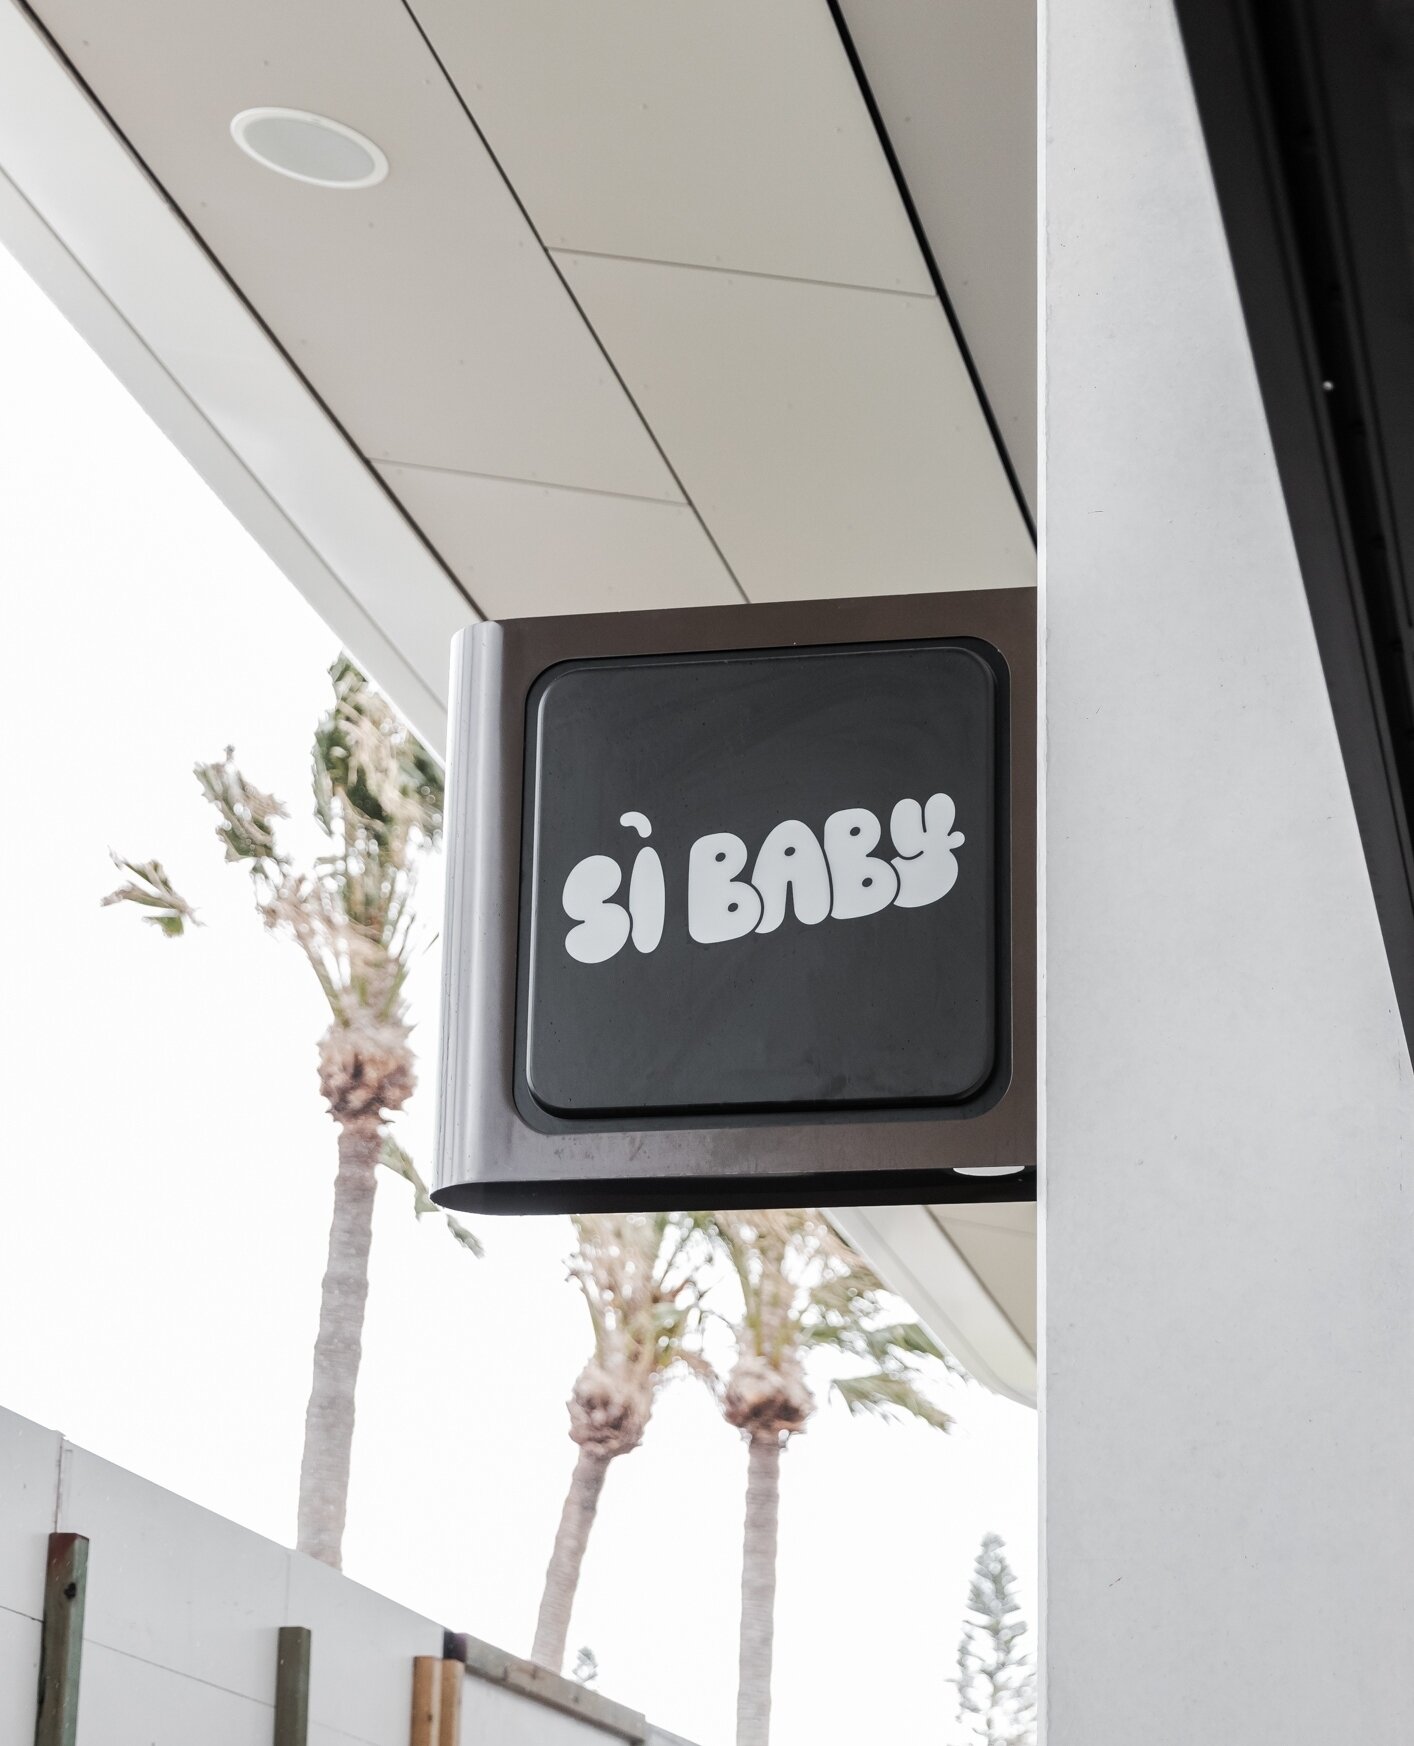 Si Baby Italian Restaurant ||| Coming soon by Enixr Built.⁠
⁠
Coming to Newport Marketplace is Si Baby, an Italian restaurant that Enixr will bring to life. The 65 seated venue will deliver a massive  region-spanning menu of Italian eats including pi